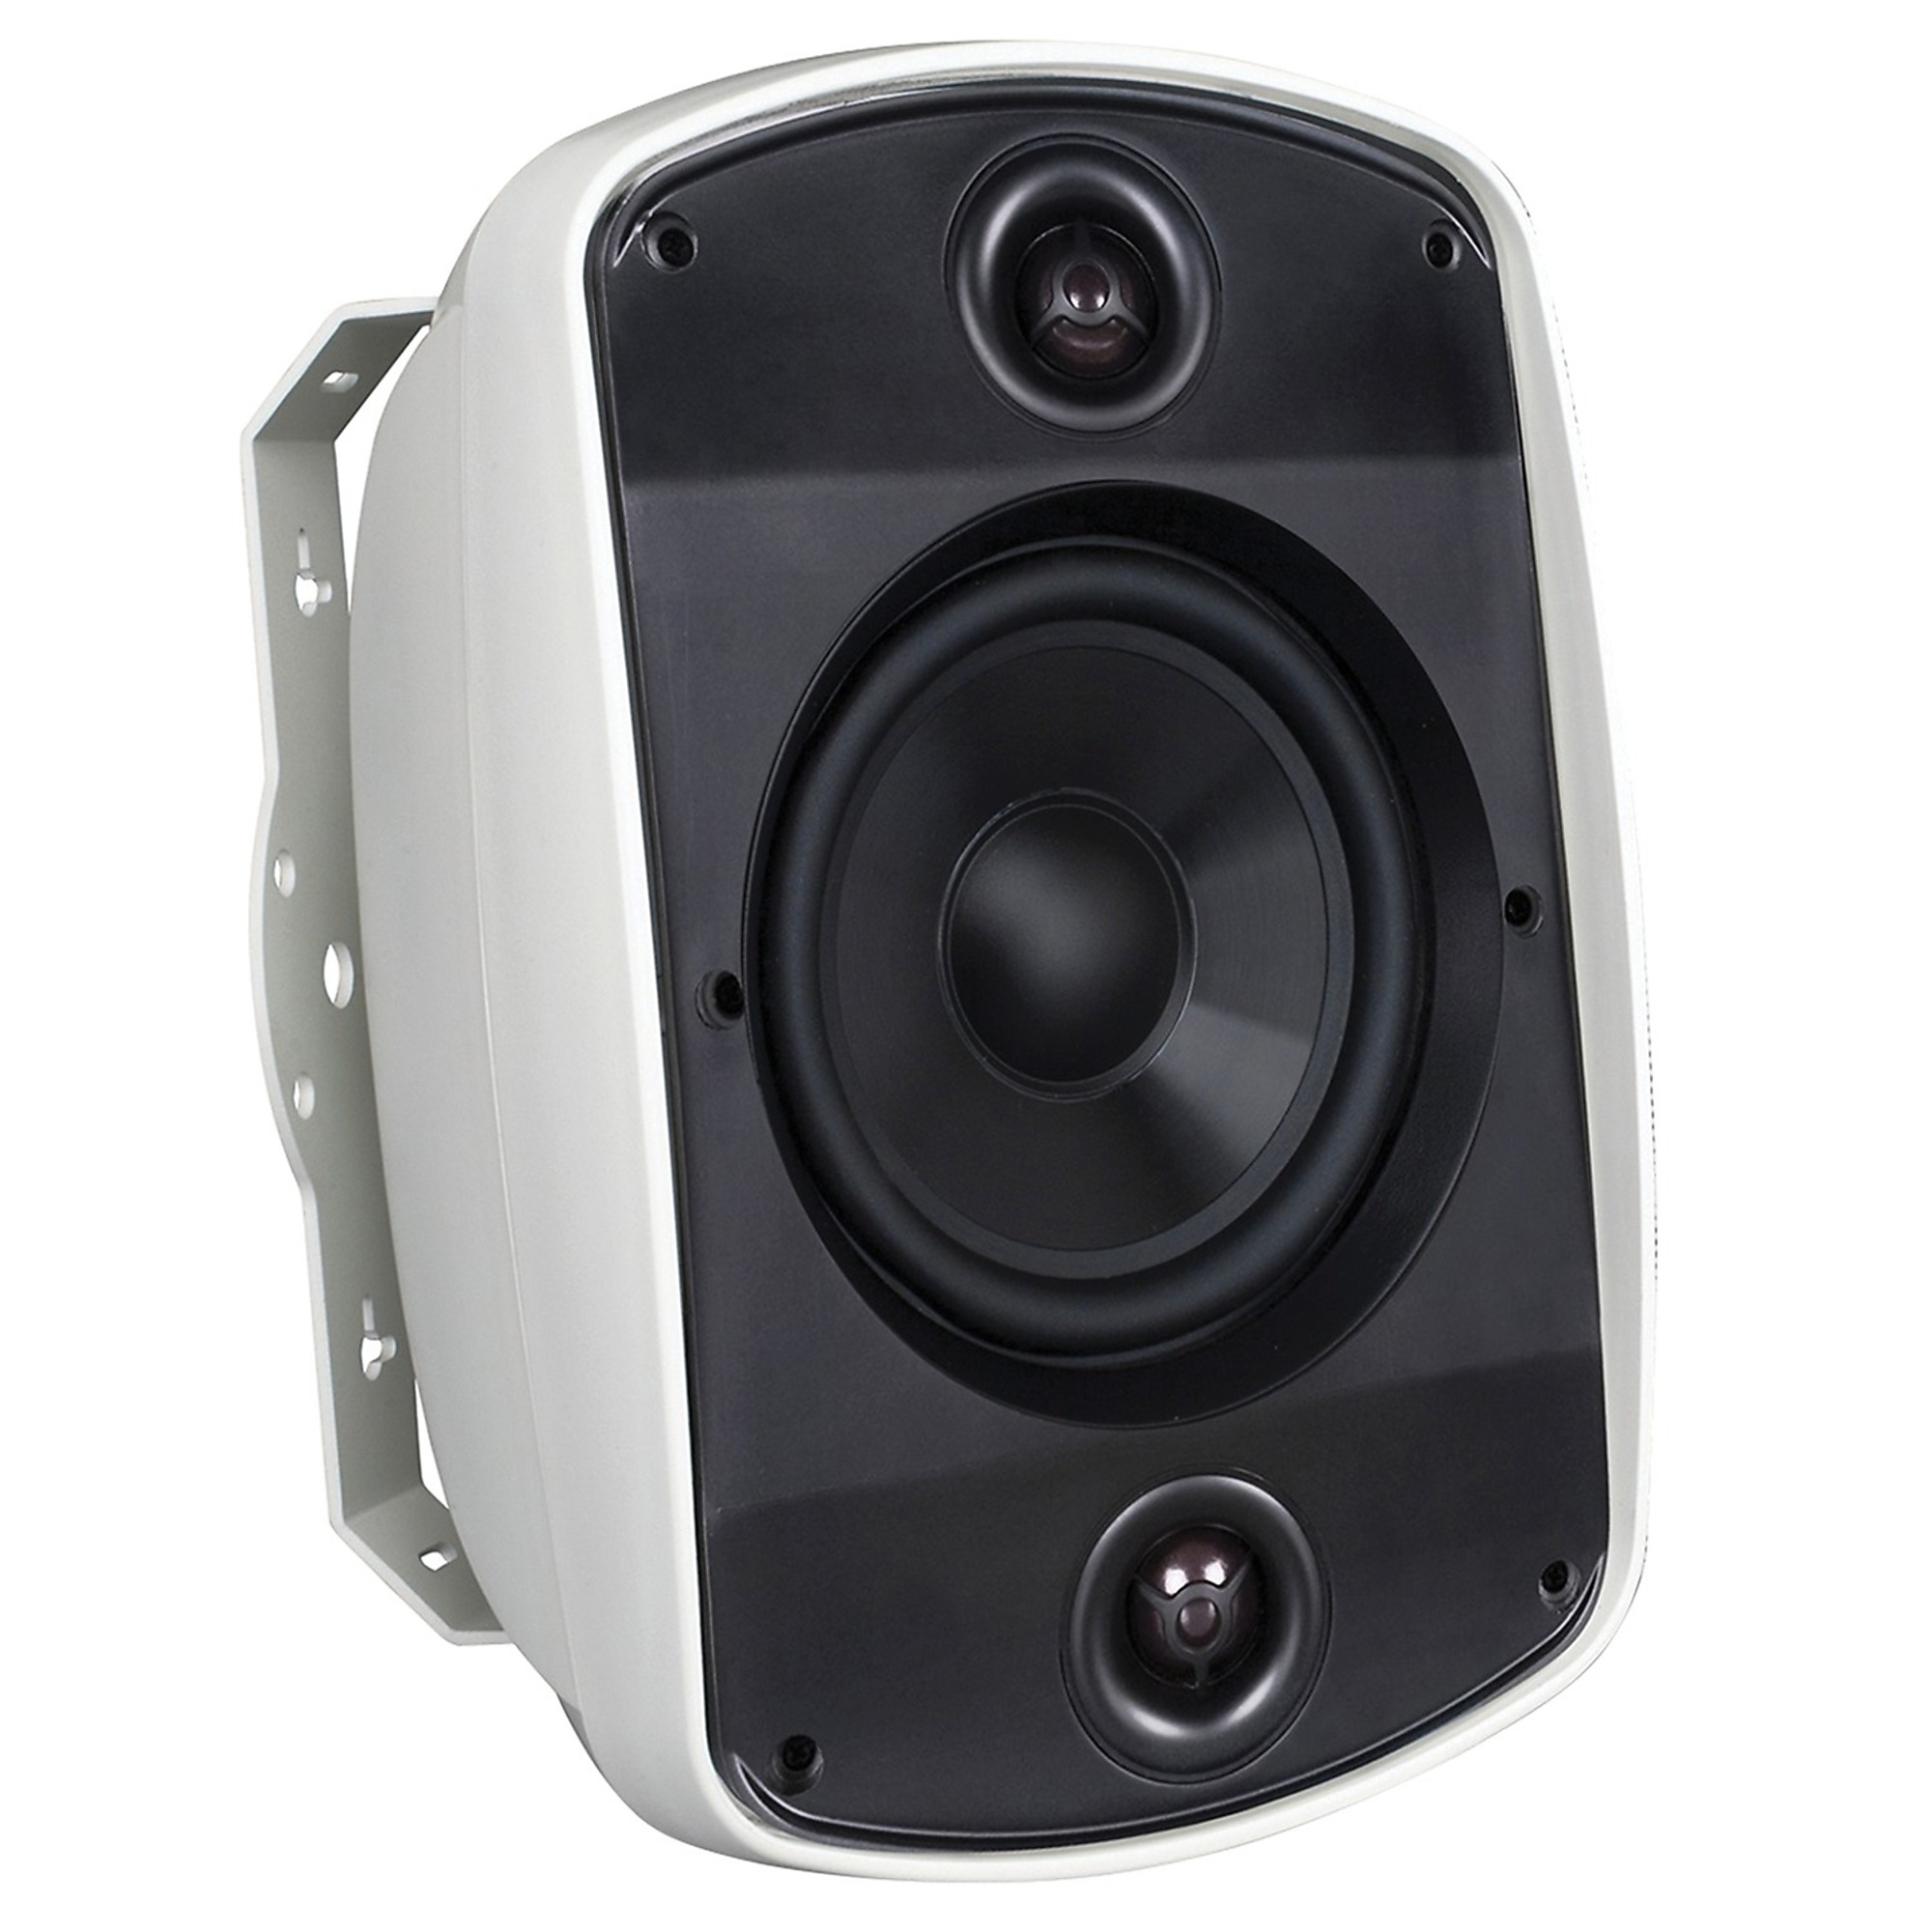 Russound Acclaim 5 Series, OutBack 6.5Inch Stereo MK2 Outdoor Speaker, Watts 150 Model 5B65Smk2-W